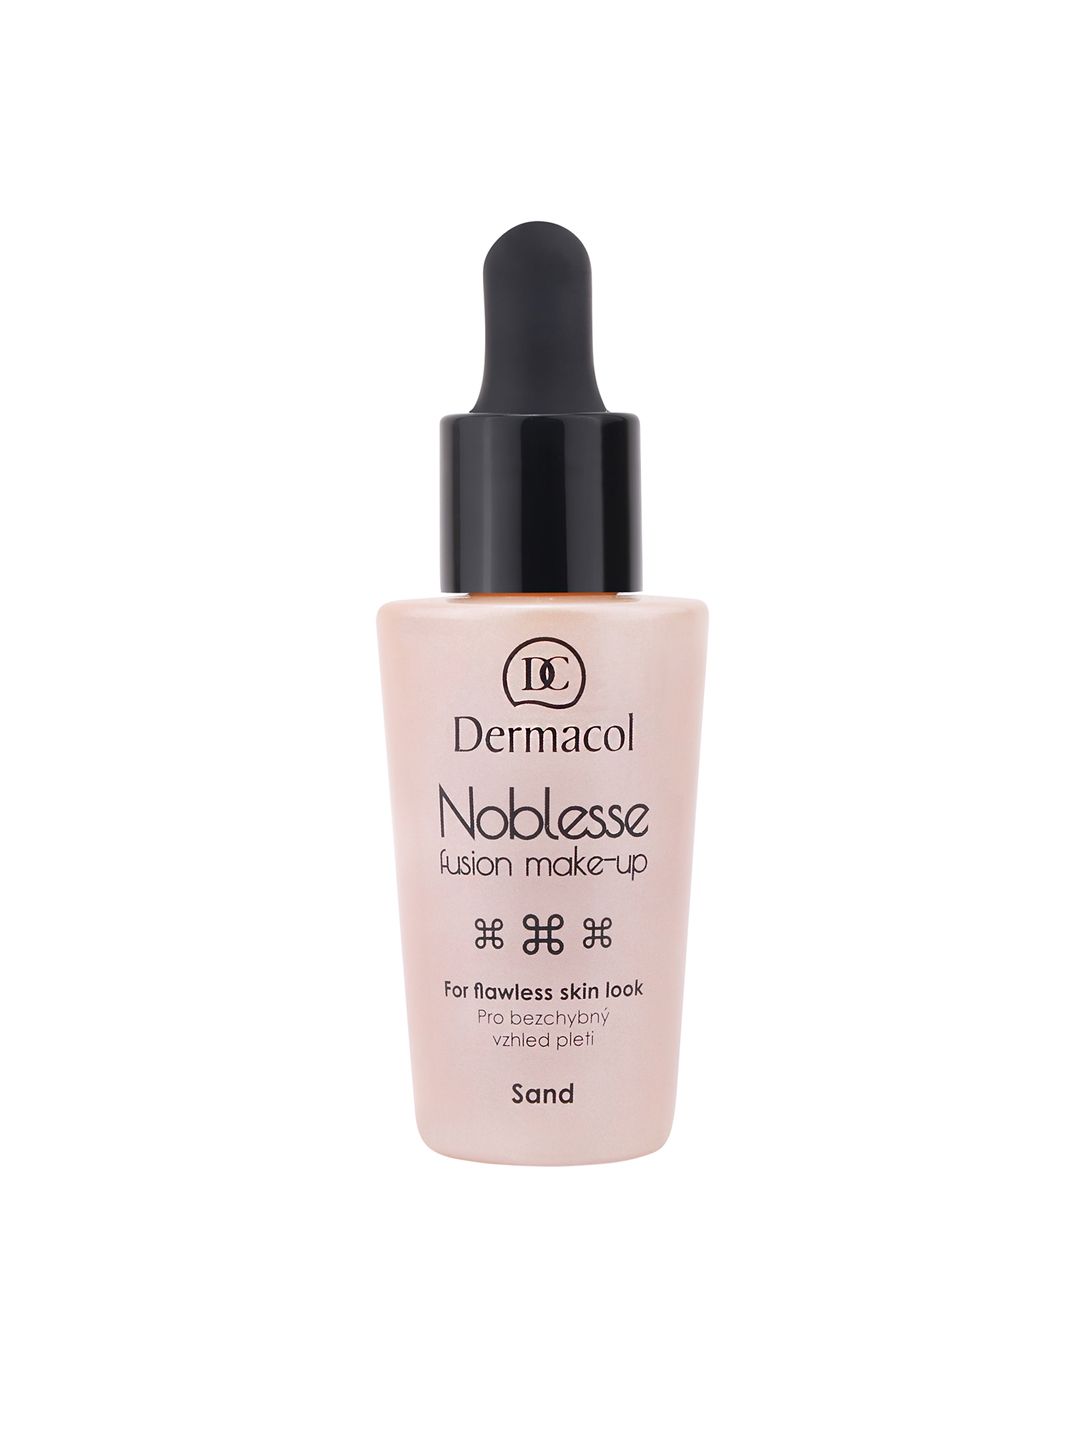 Dermacol Noblesse Fusion Make Up Foundation 03 Sand 1309 Price in India